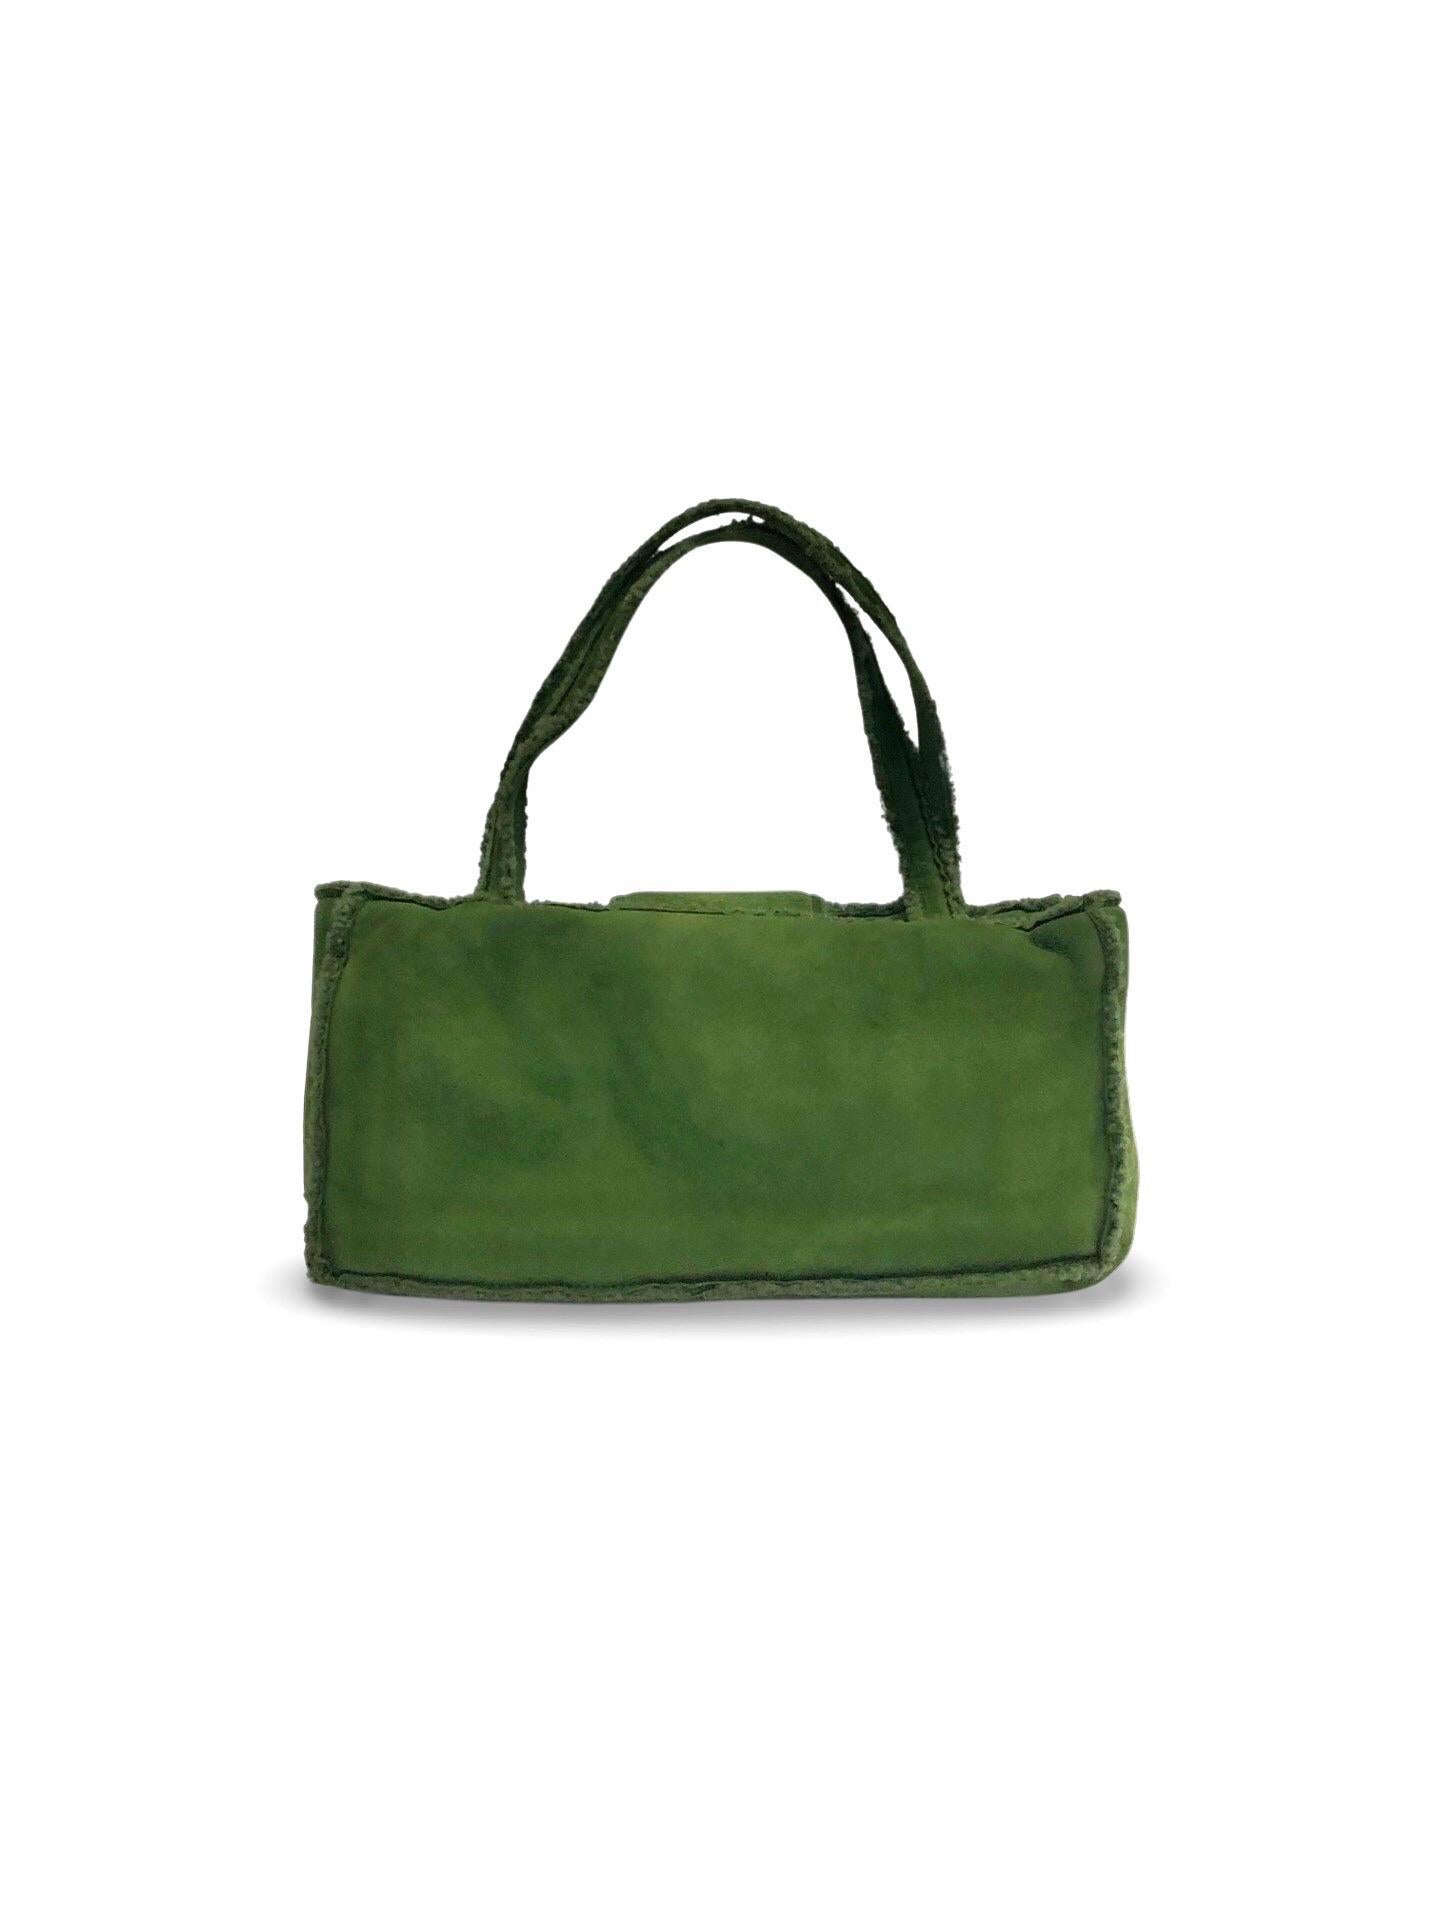 Chanel Green  Suede Shearling Trim CC Turnlock Shoulder Handbag In Excellent Condition For Sale In Sheung Wan, HK